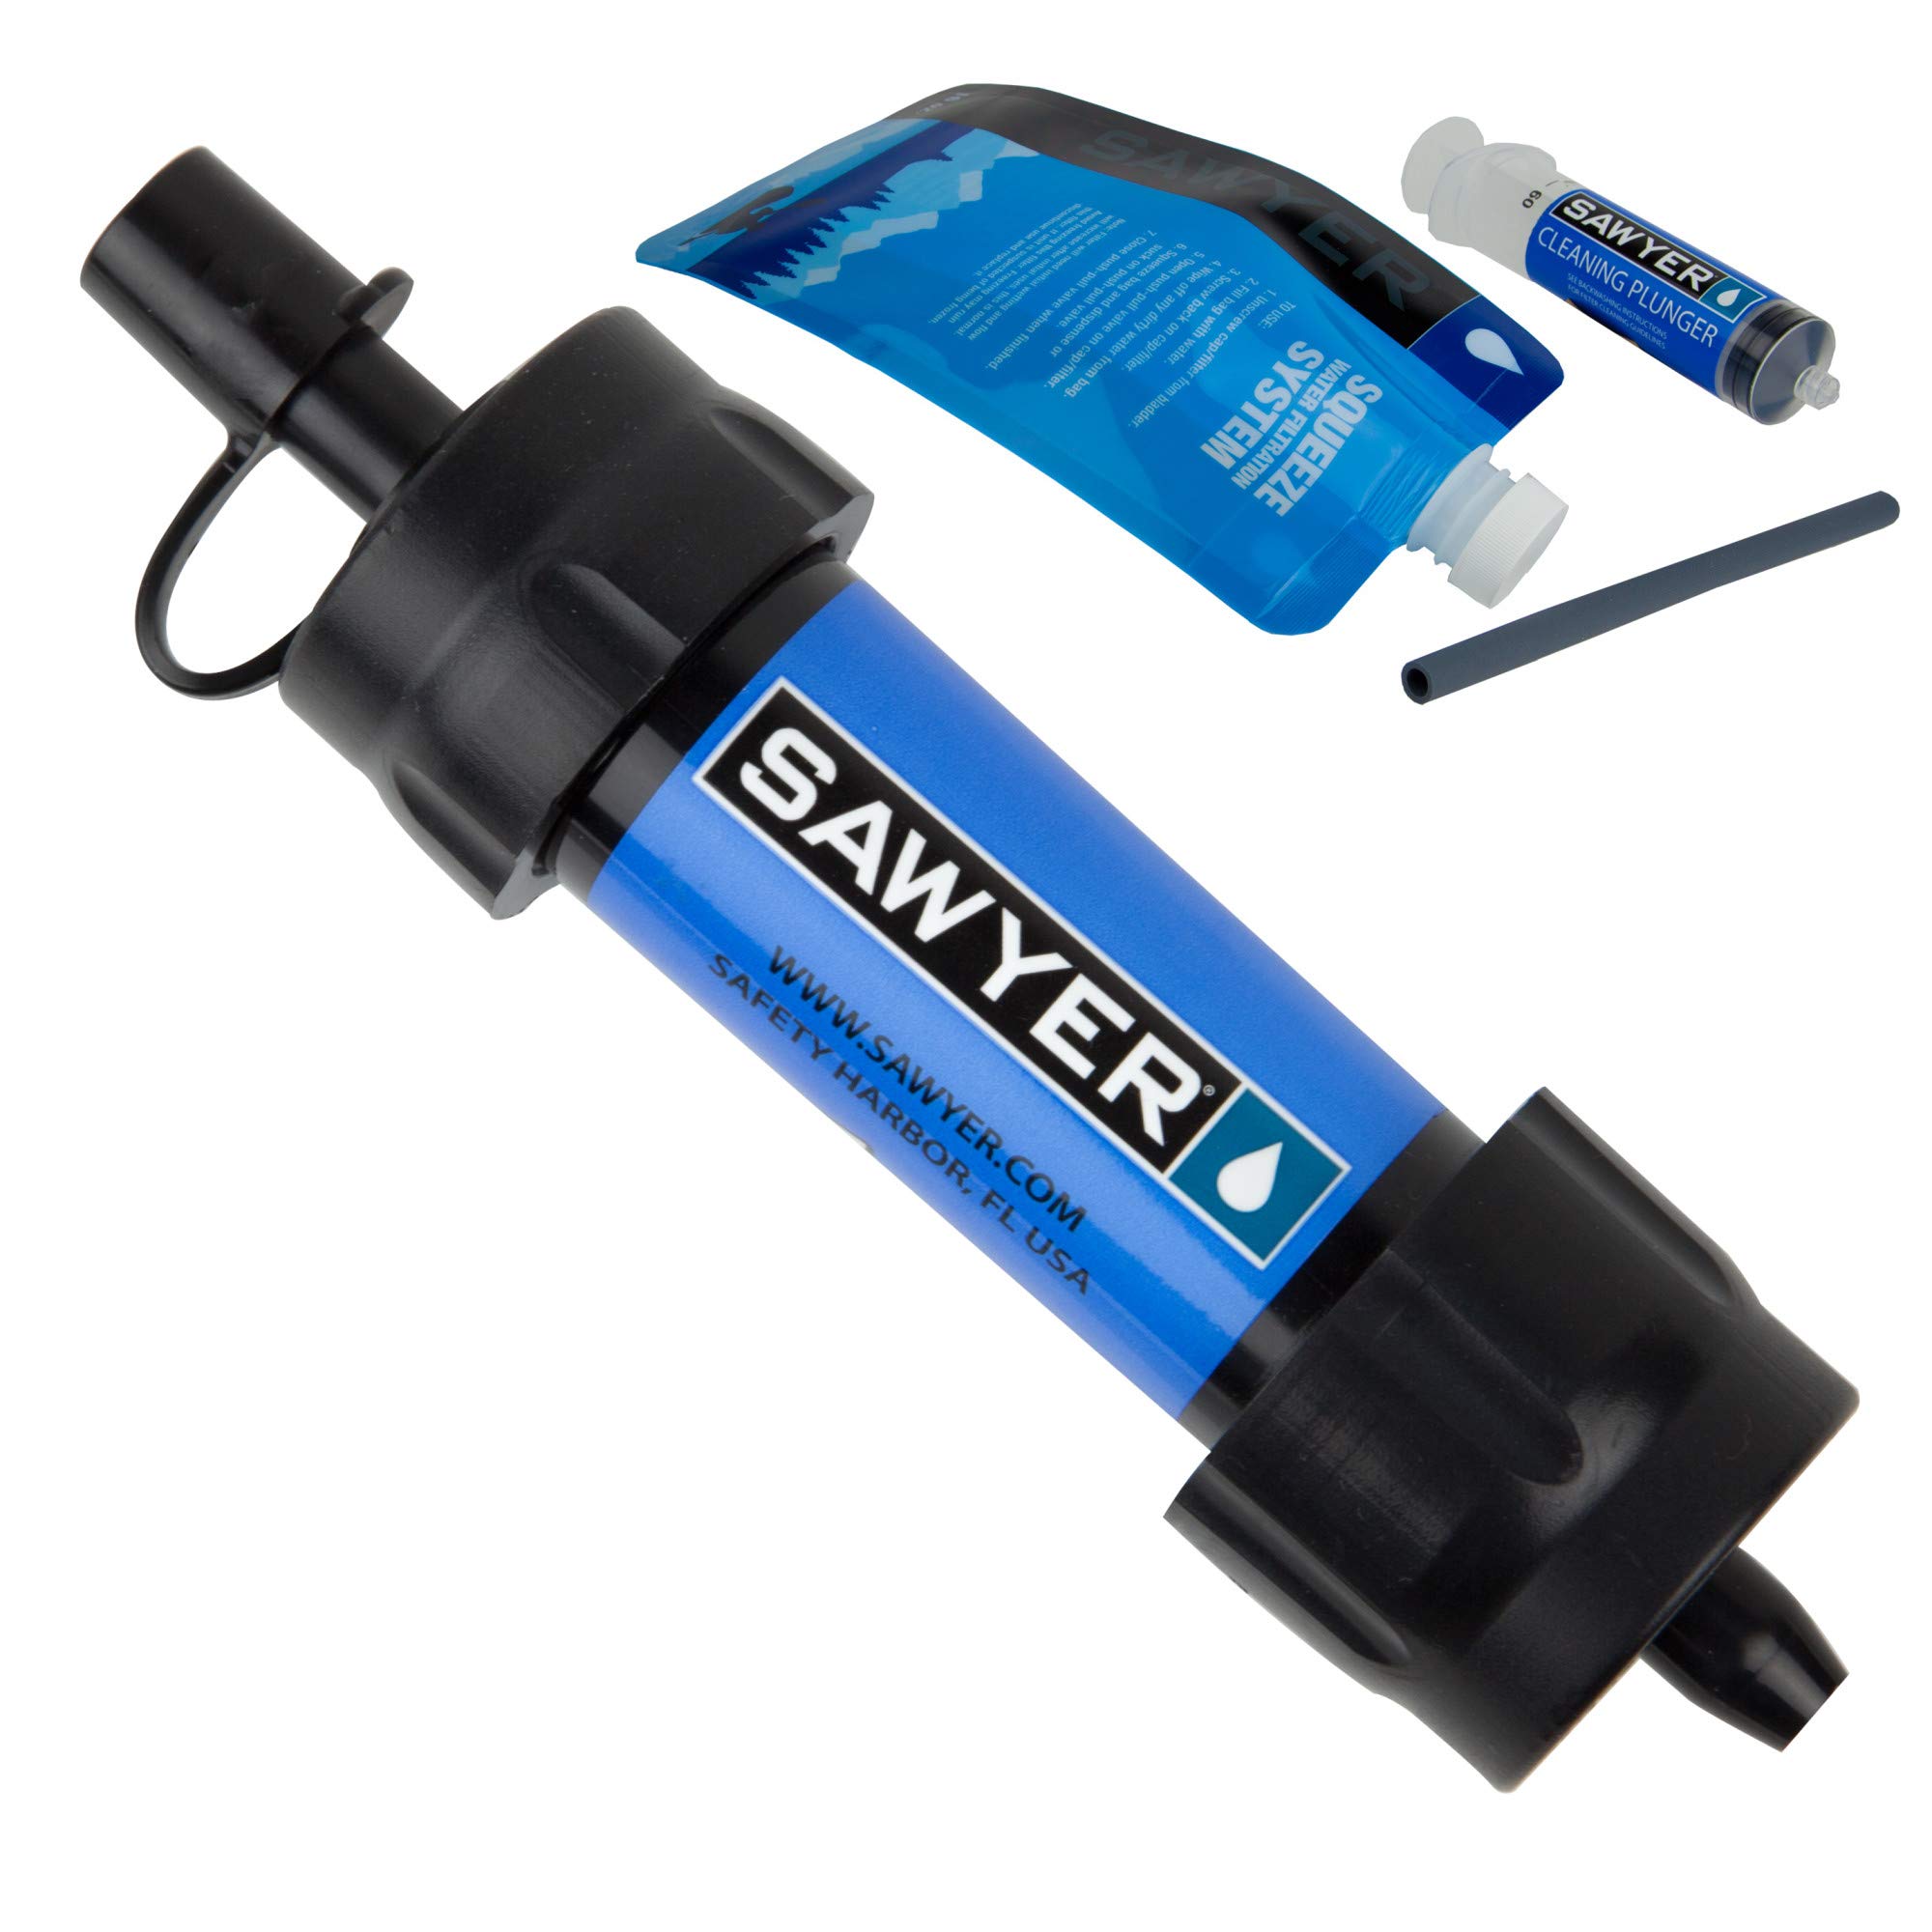 Limited-time deal: Sawyer Products SP128 Mini Water Filtration System, Single, Blue - $17.41